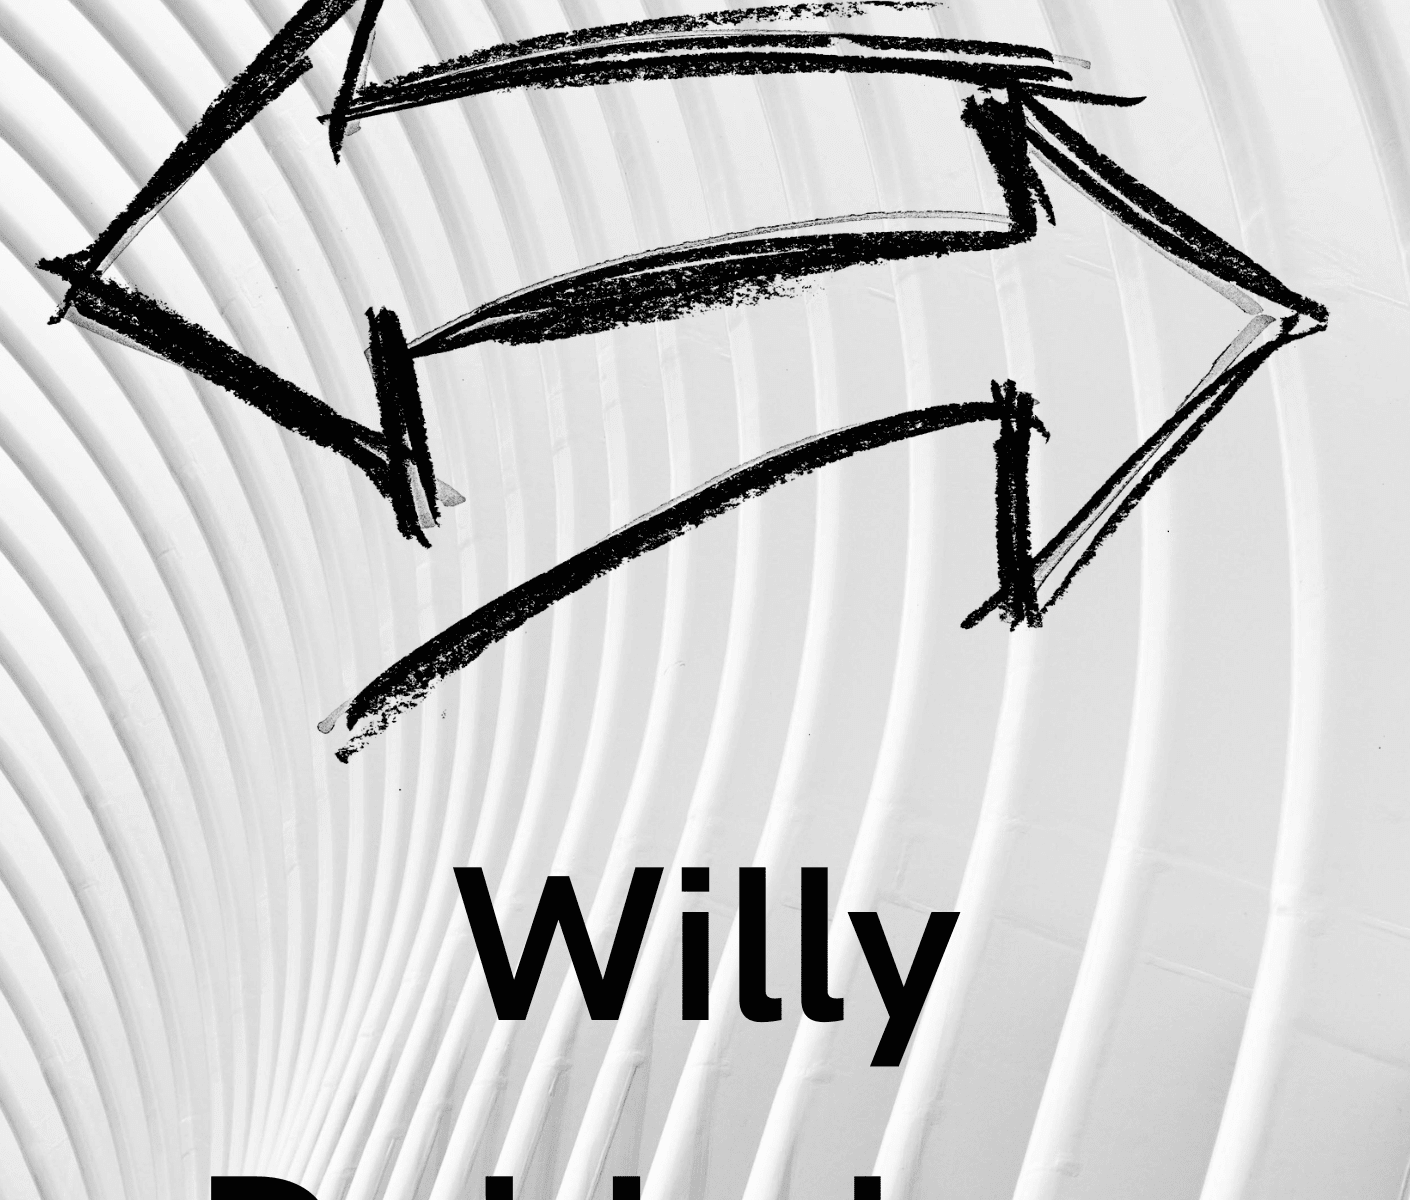 e-book by Willy Dubbelaar - Wrong Choise. About making choises in life